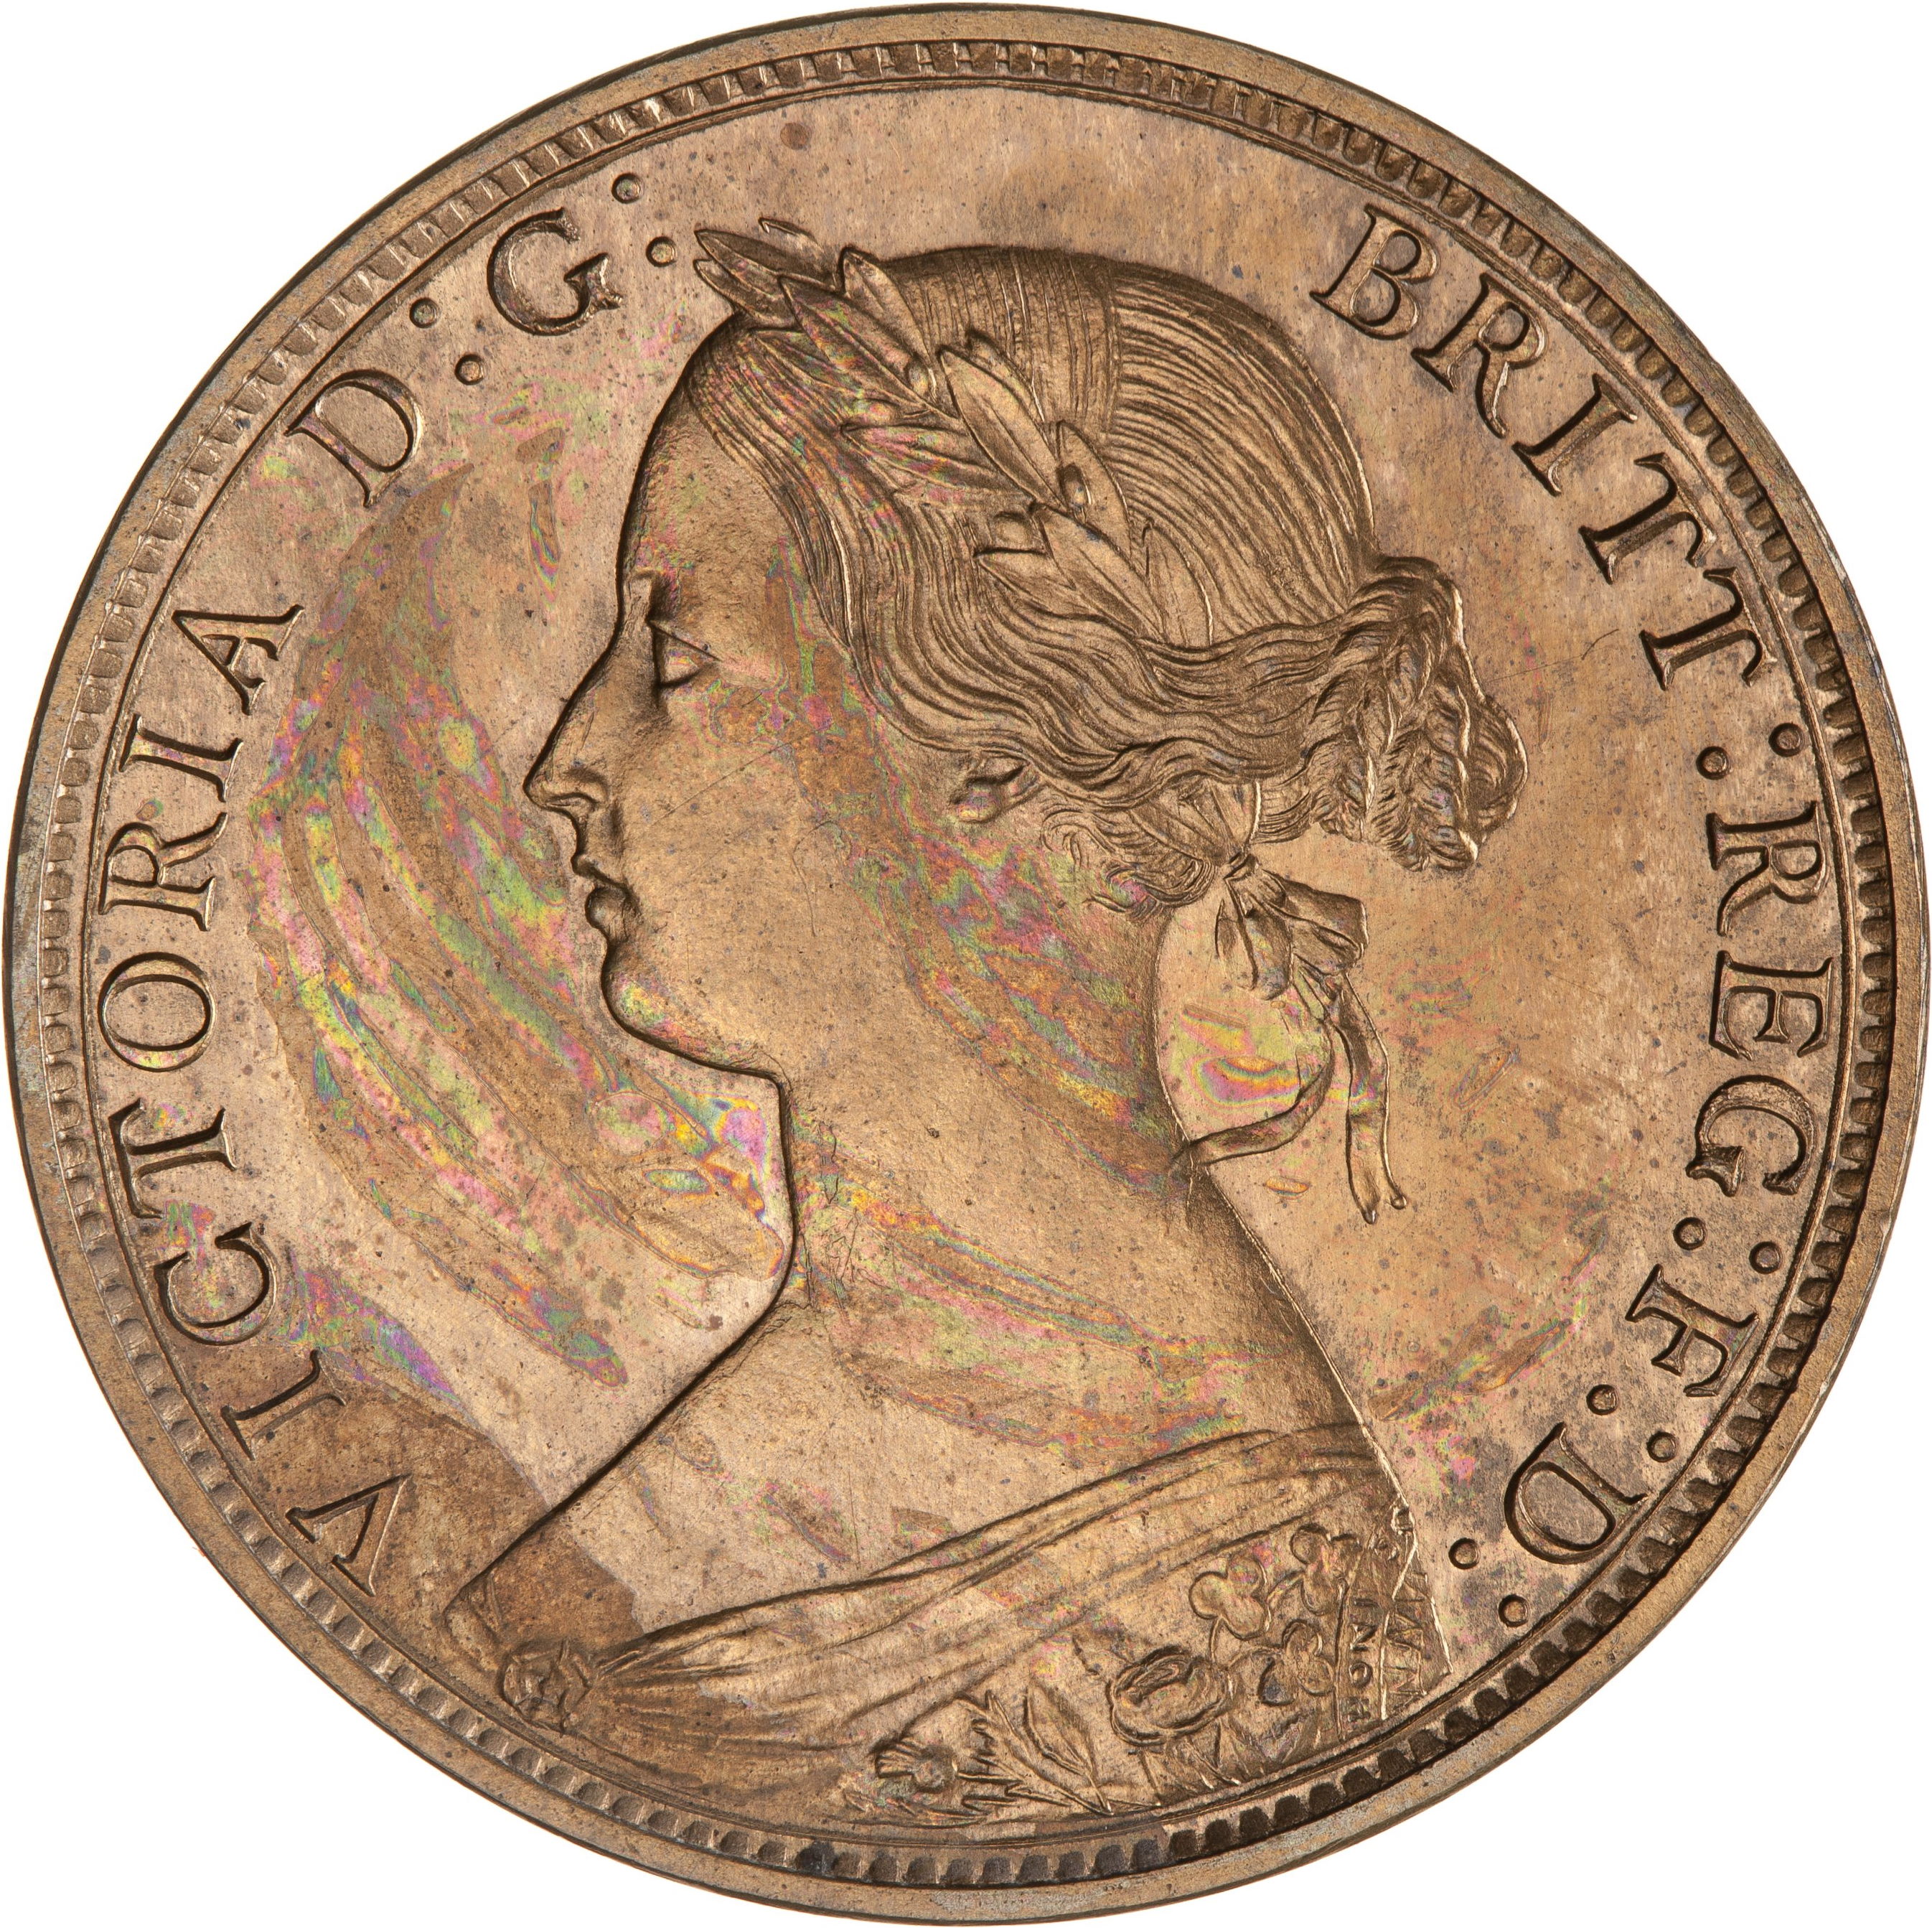 Obverse of 1861 New Brunswick One Cent Proof